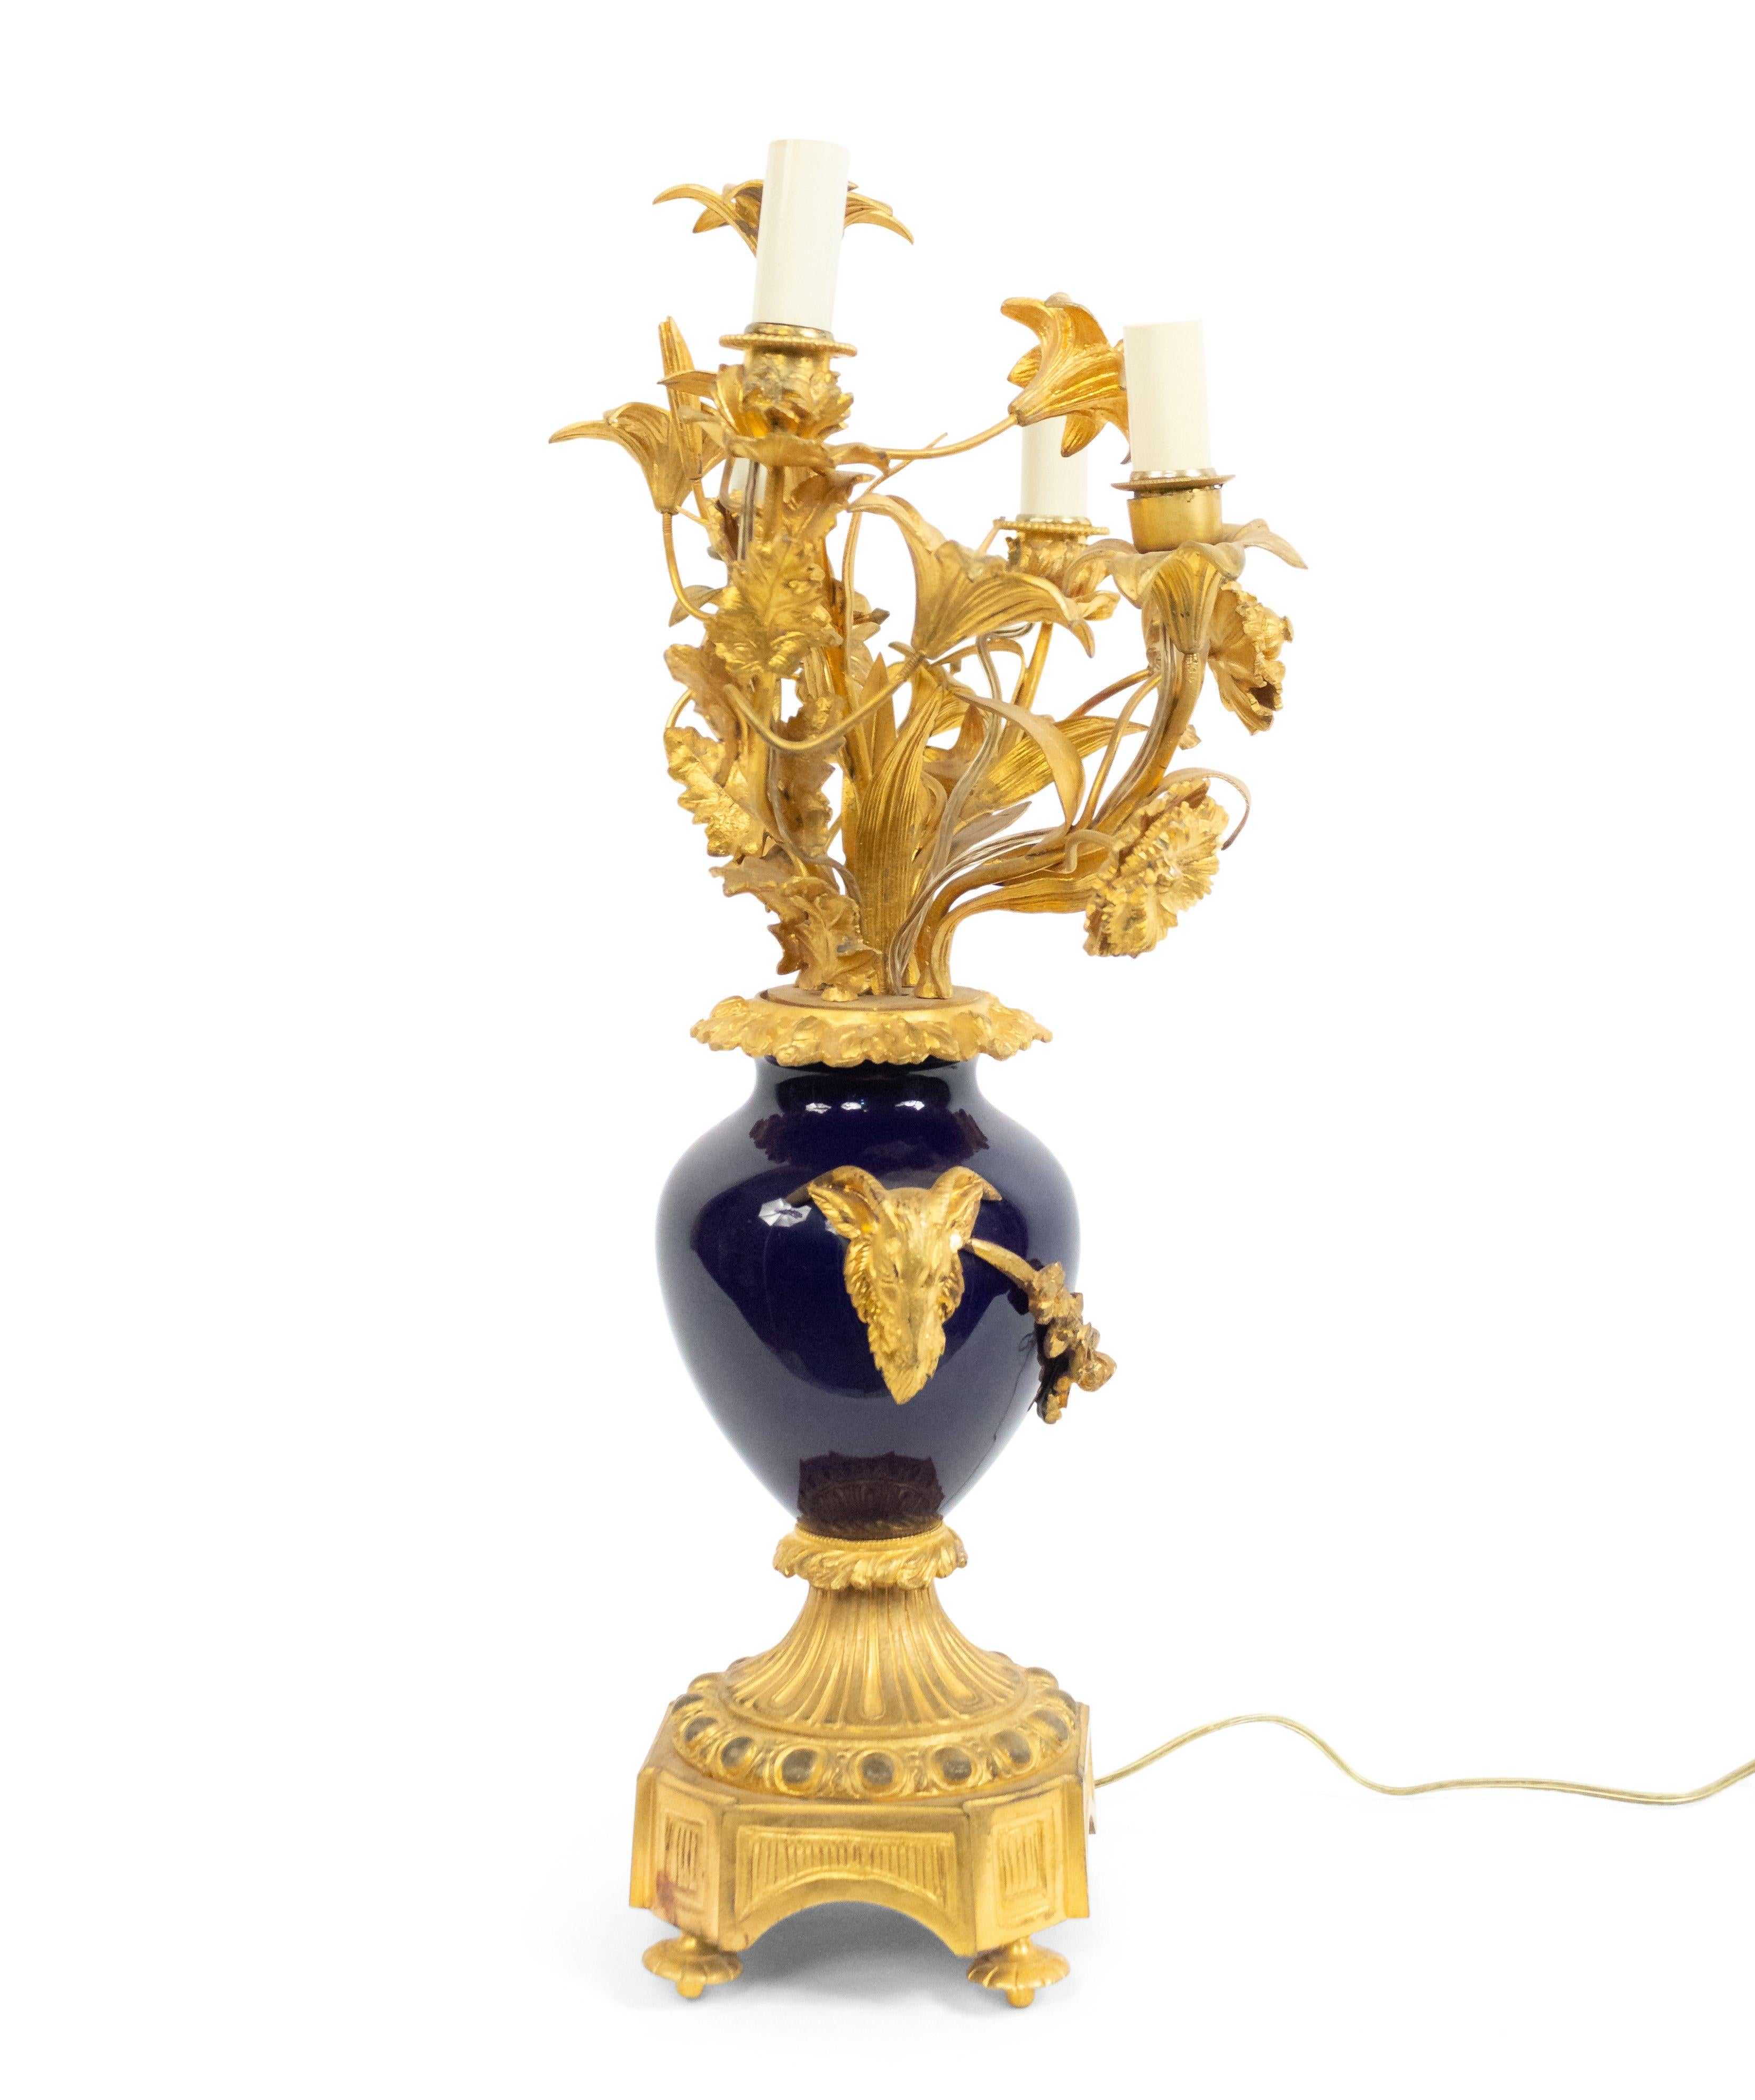 French Victorian (19th-20th Century) gilt bronze four-light candelabra (wired as a lamp) with floral arms over a porcelain blue urn with rams head handles culminating in a footed bronze base.